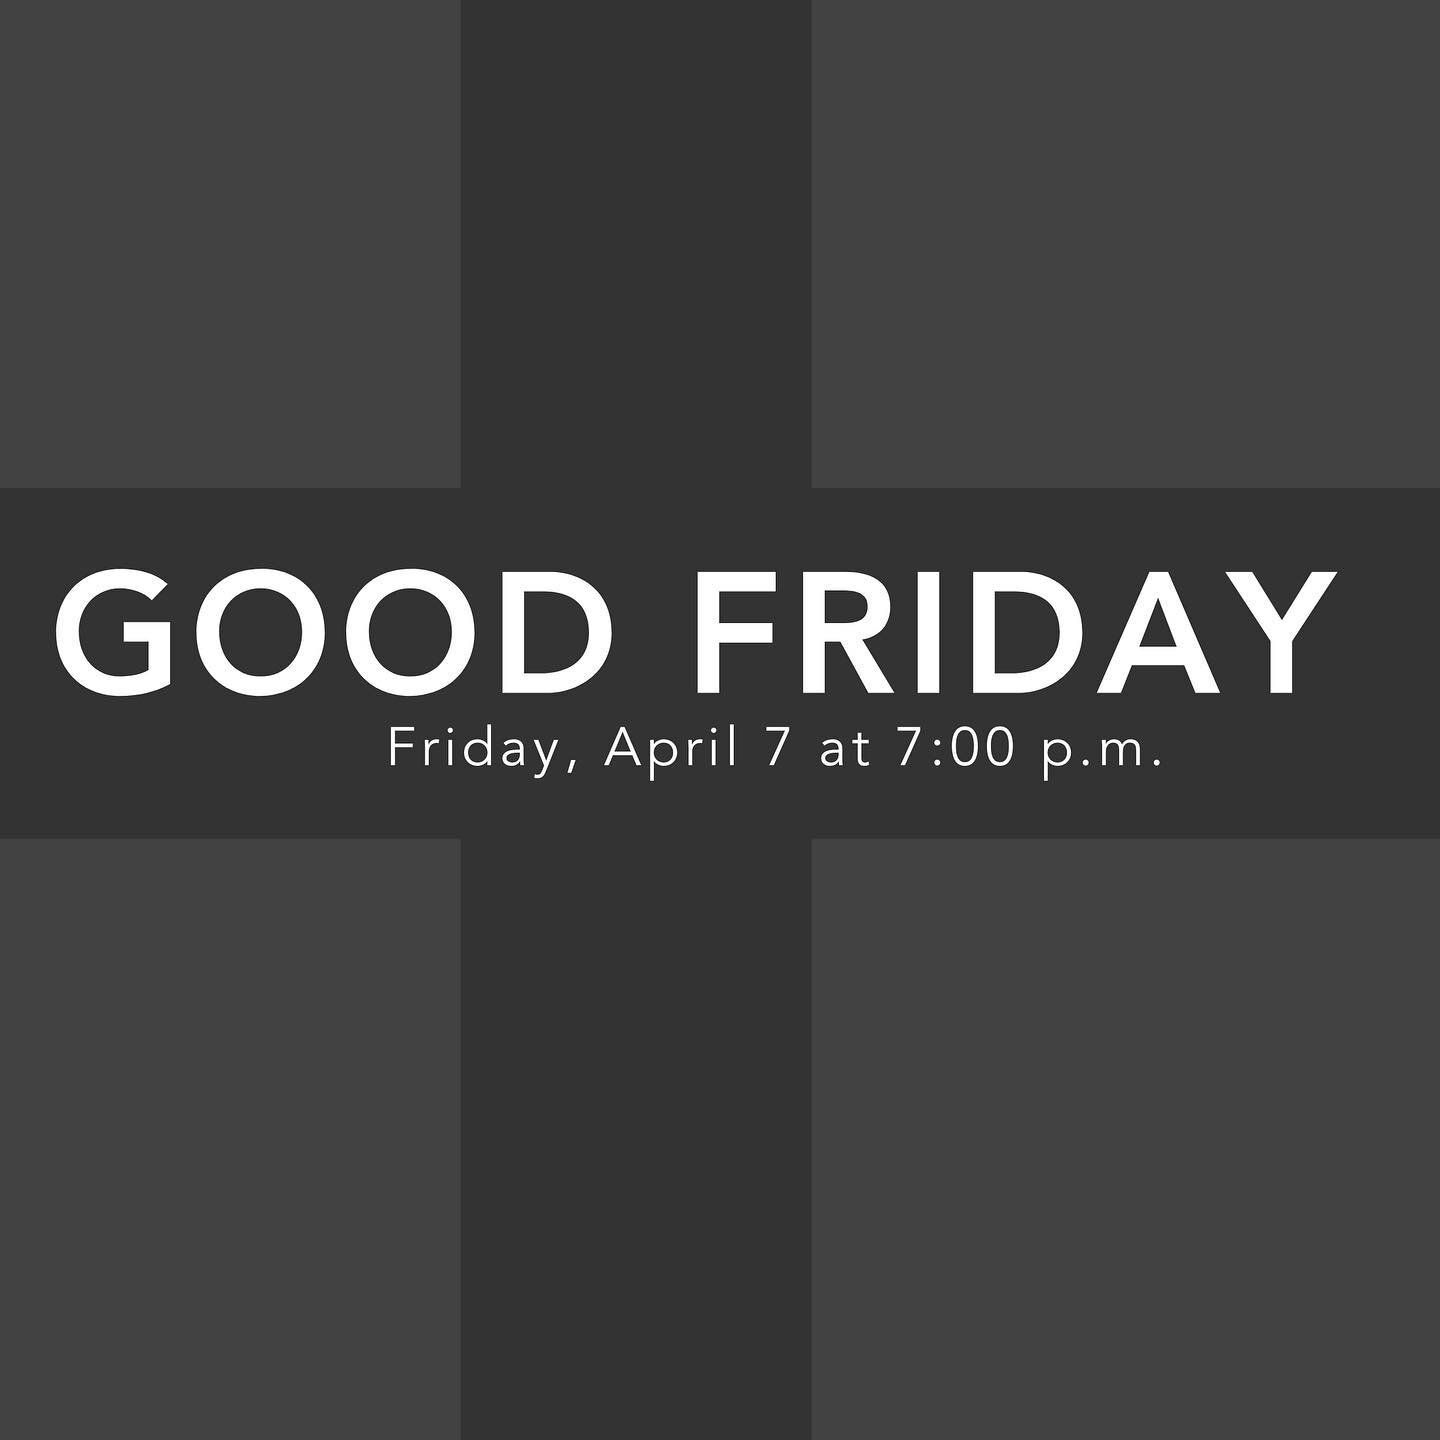 Join us Friday at 7pm for a meditative Good Friday service. (Childcare is provided for infants-pre-k. Please register your kids by the end of the day TODAY via Church Center)